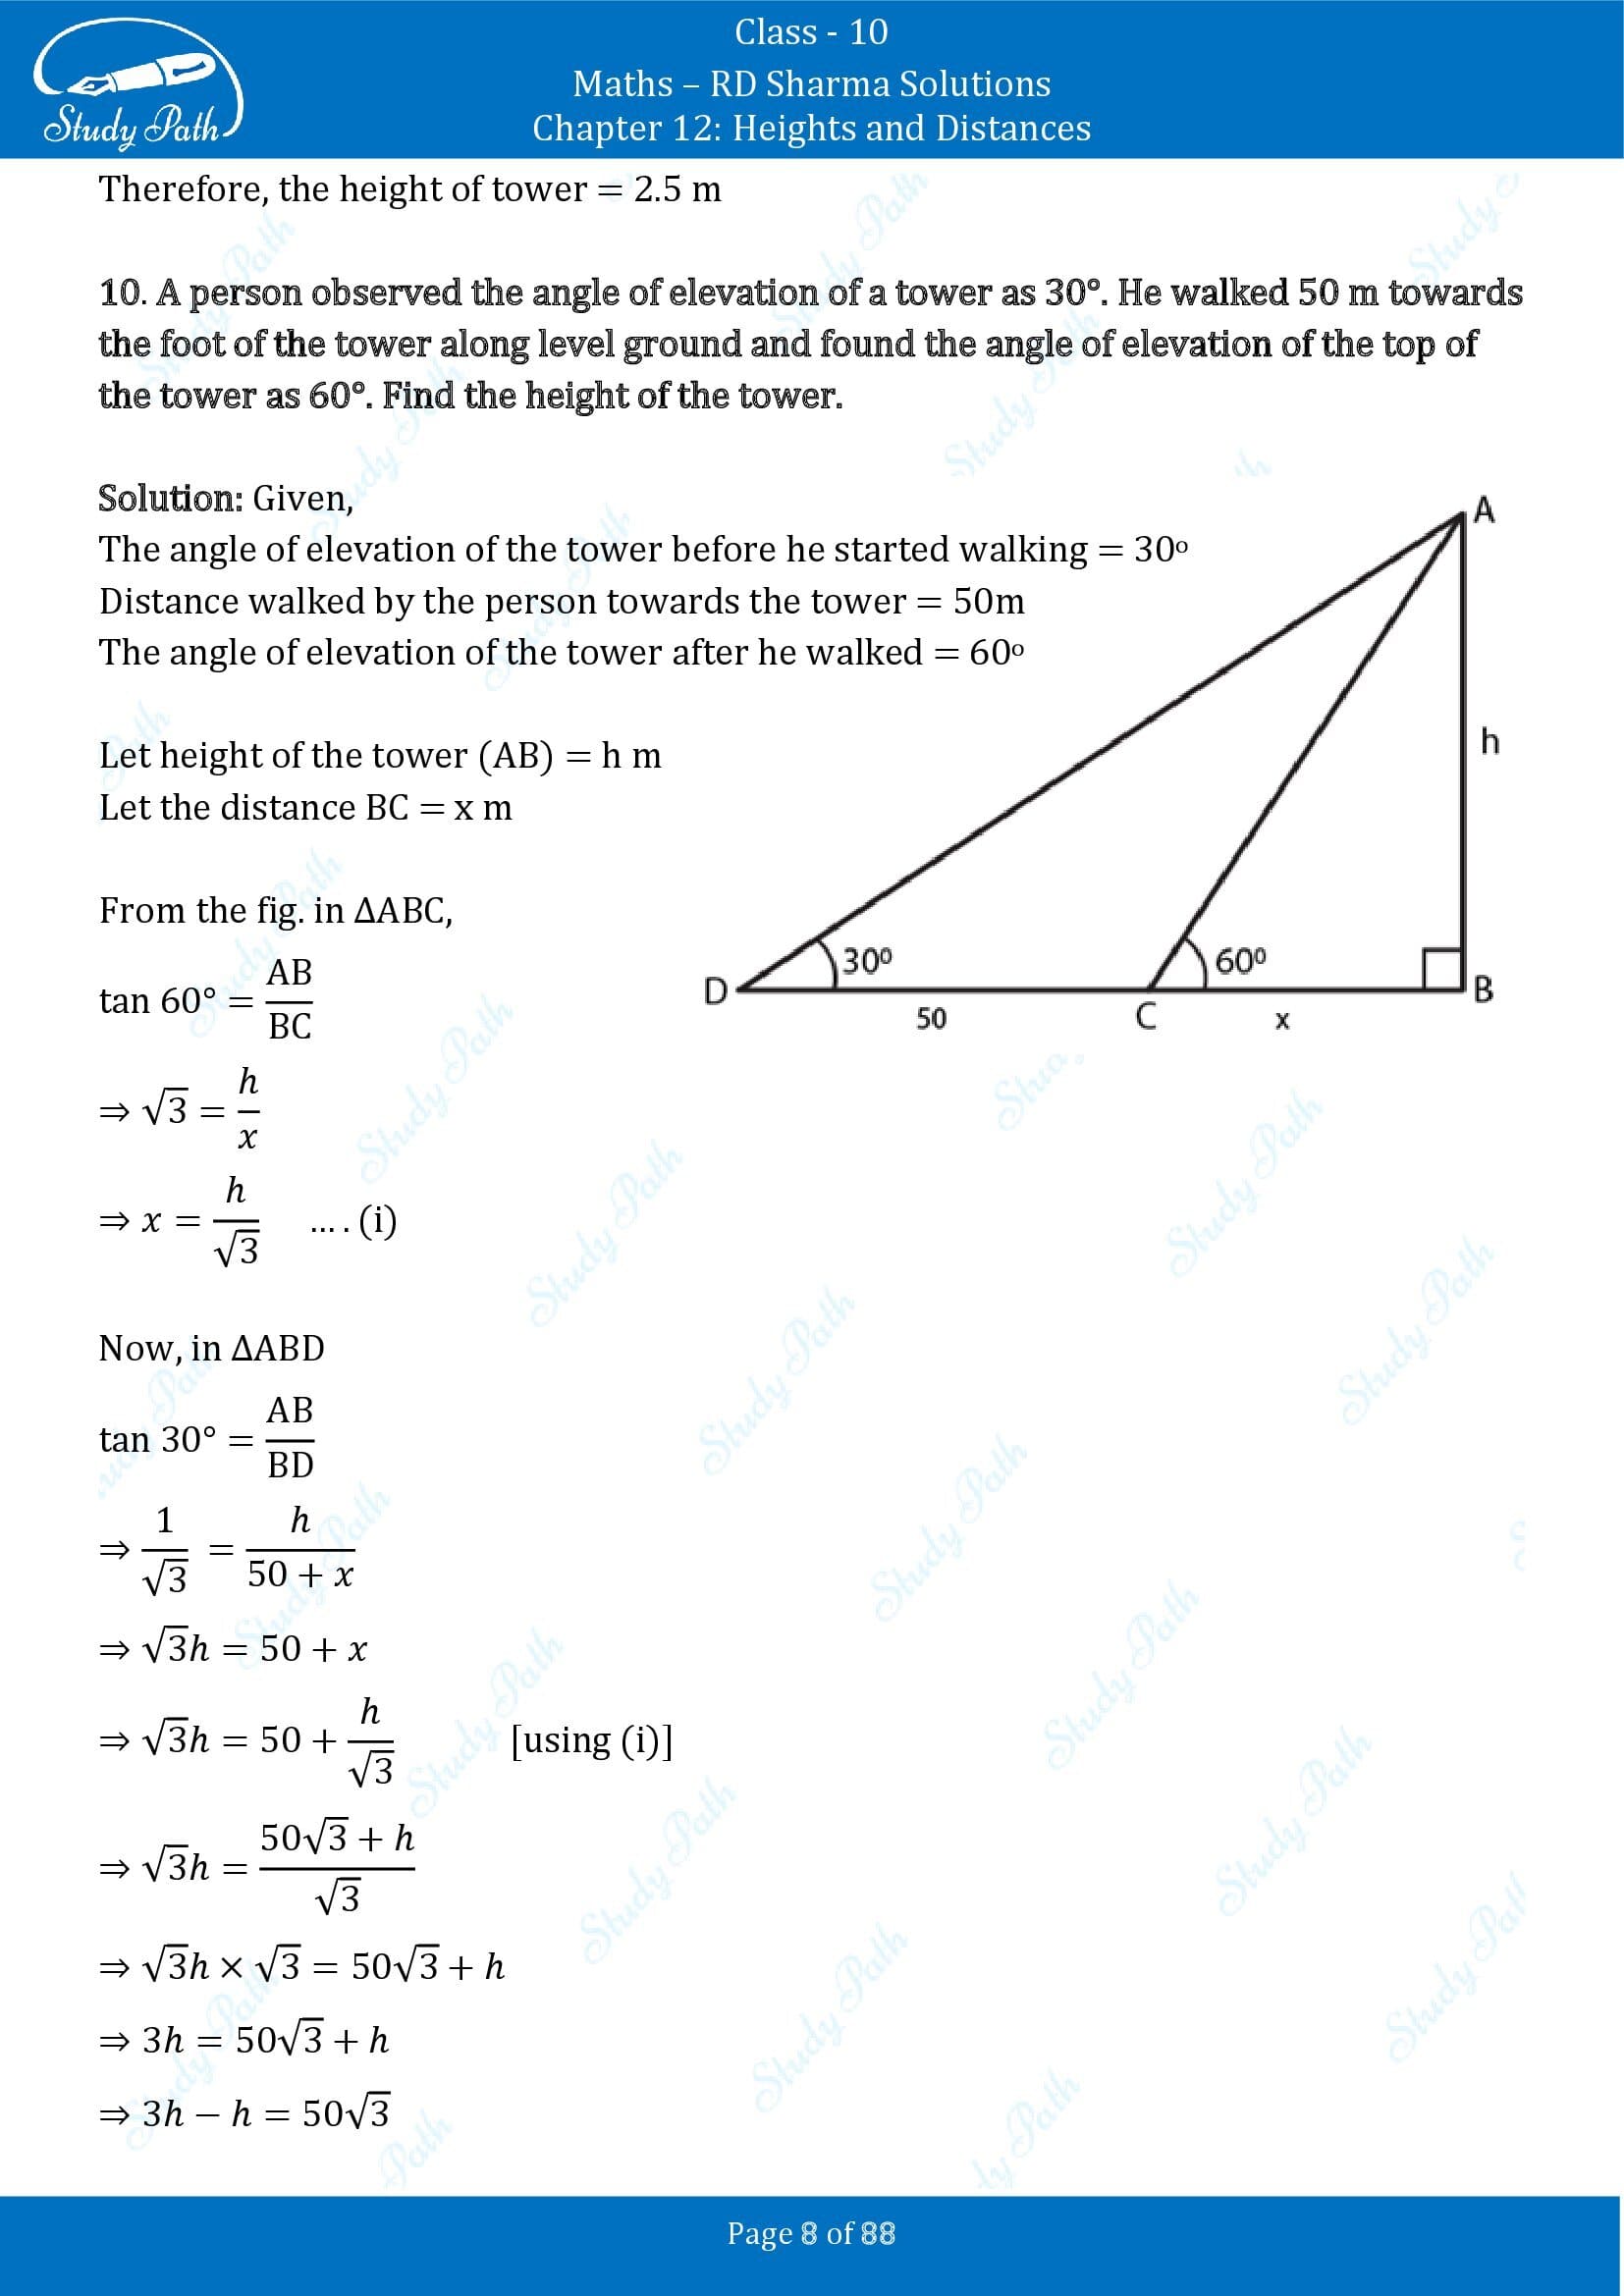 RD Sharma Solutions Class 10 Chapter 12 Heights and Distances Exercise 12.1 00008